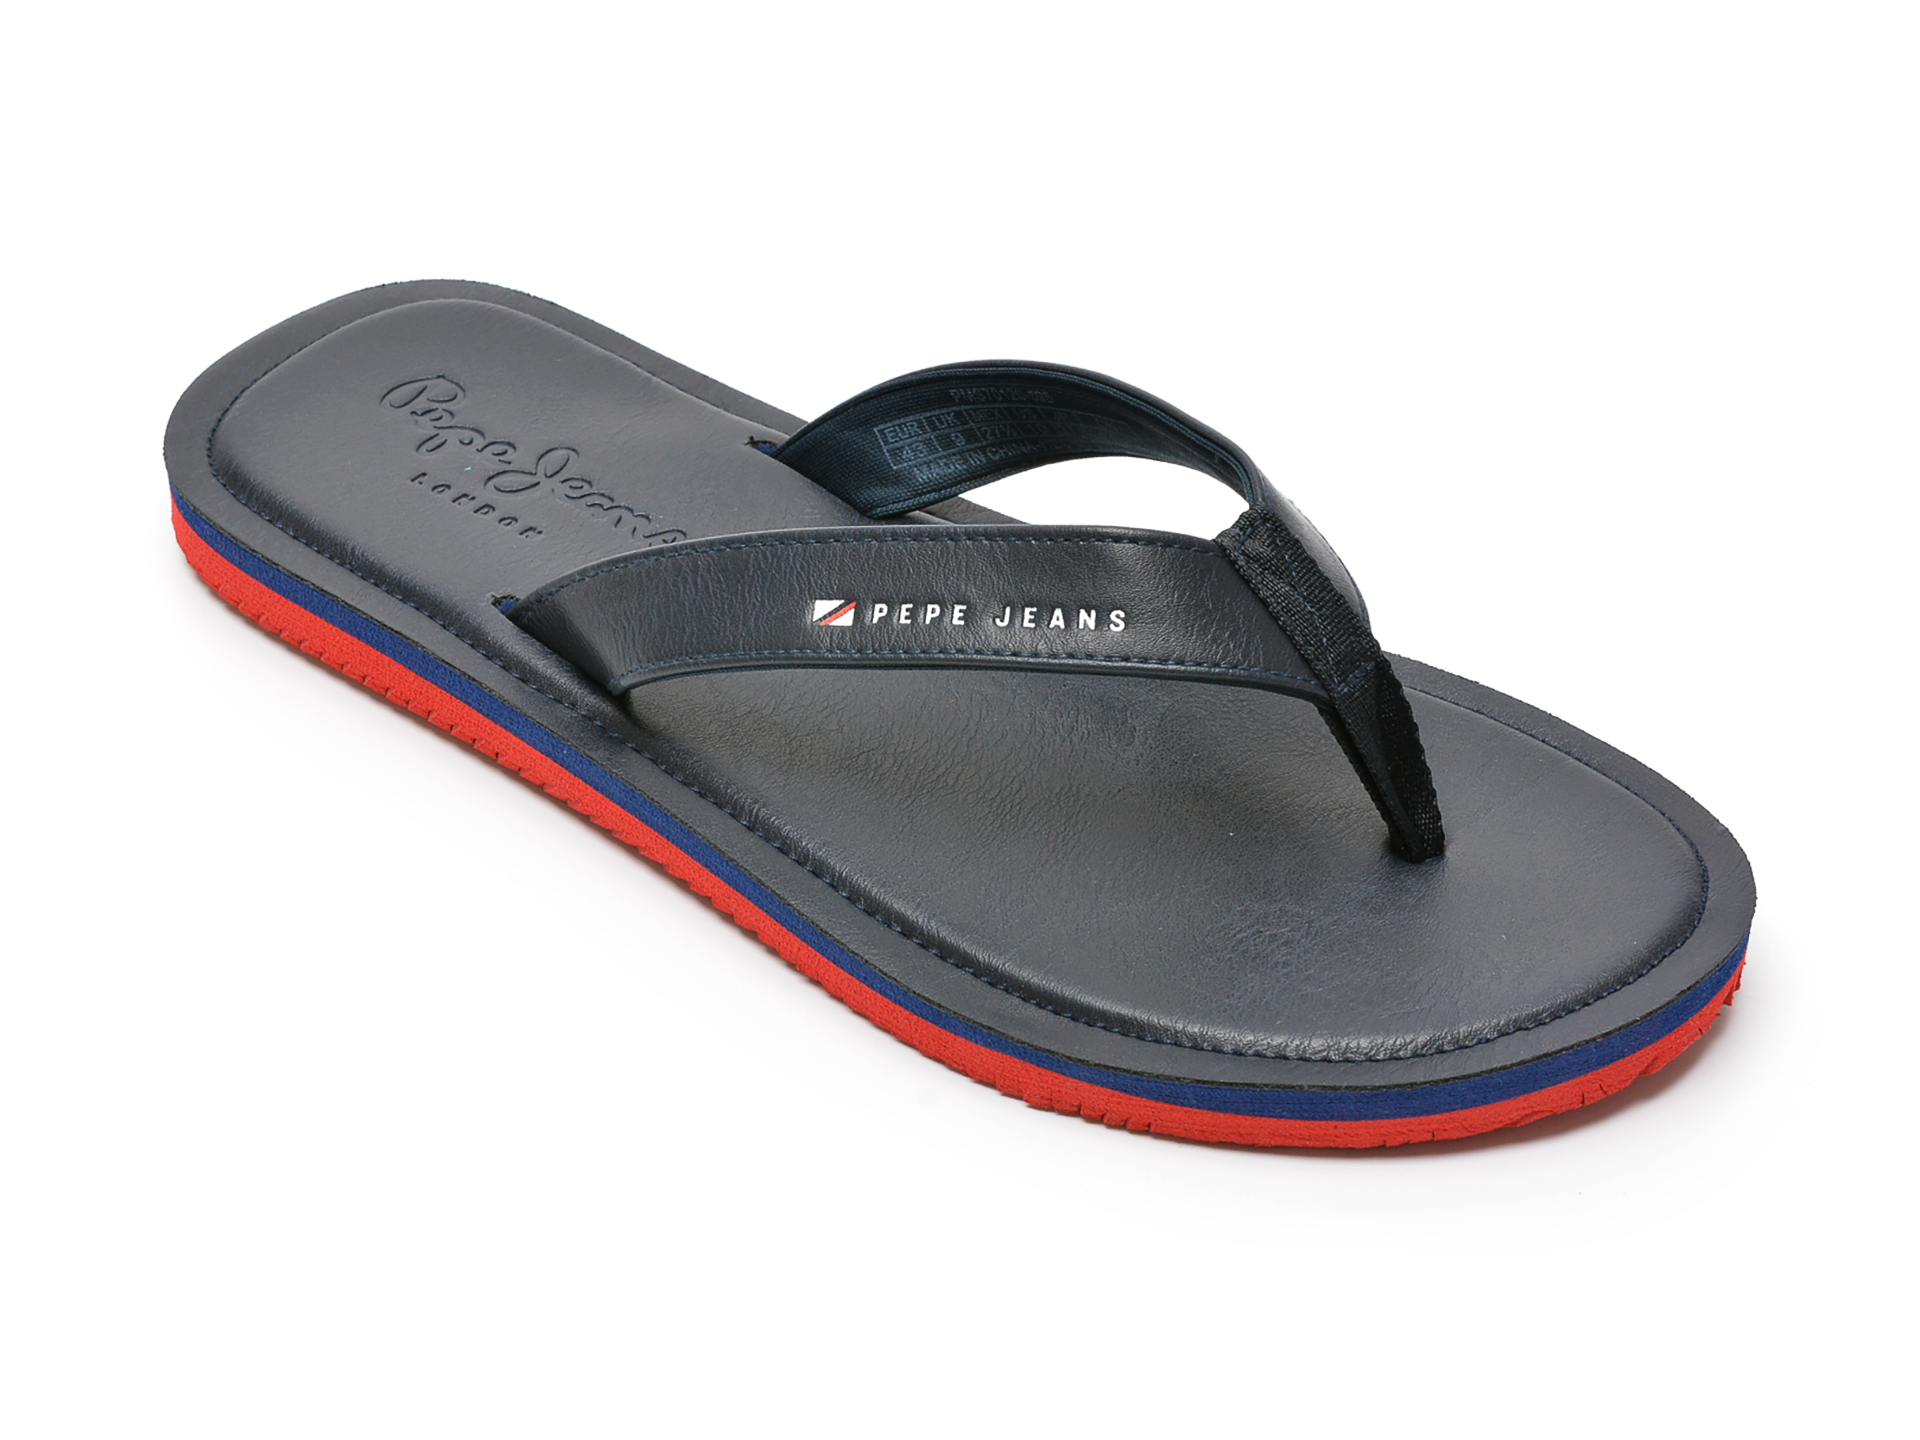 Papuci PEPE JEANS bleumarin, MS70120, din piele ecologica otter.ro